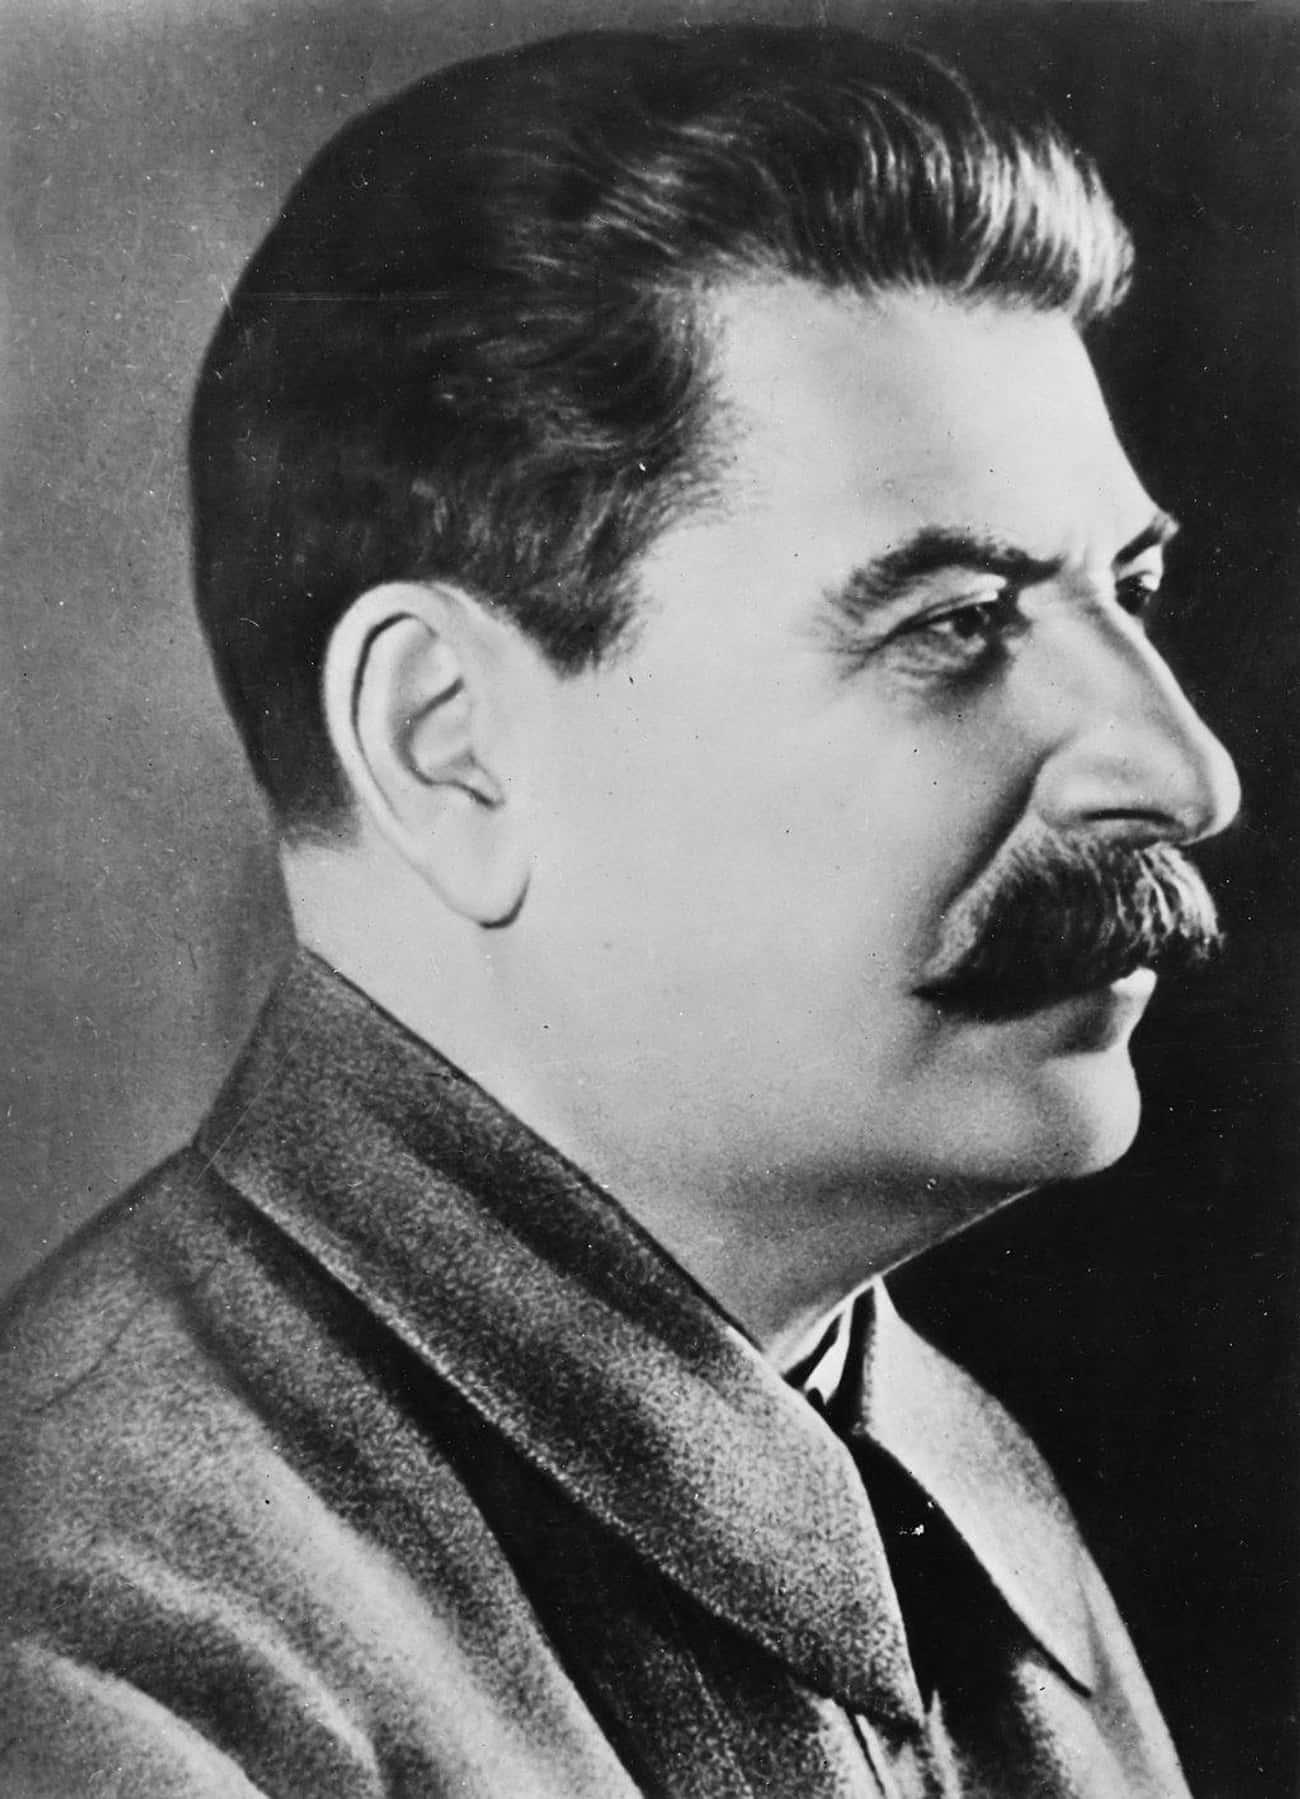 Stalin Eliminated Weekends To Boost Productivity In 1929